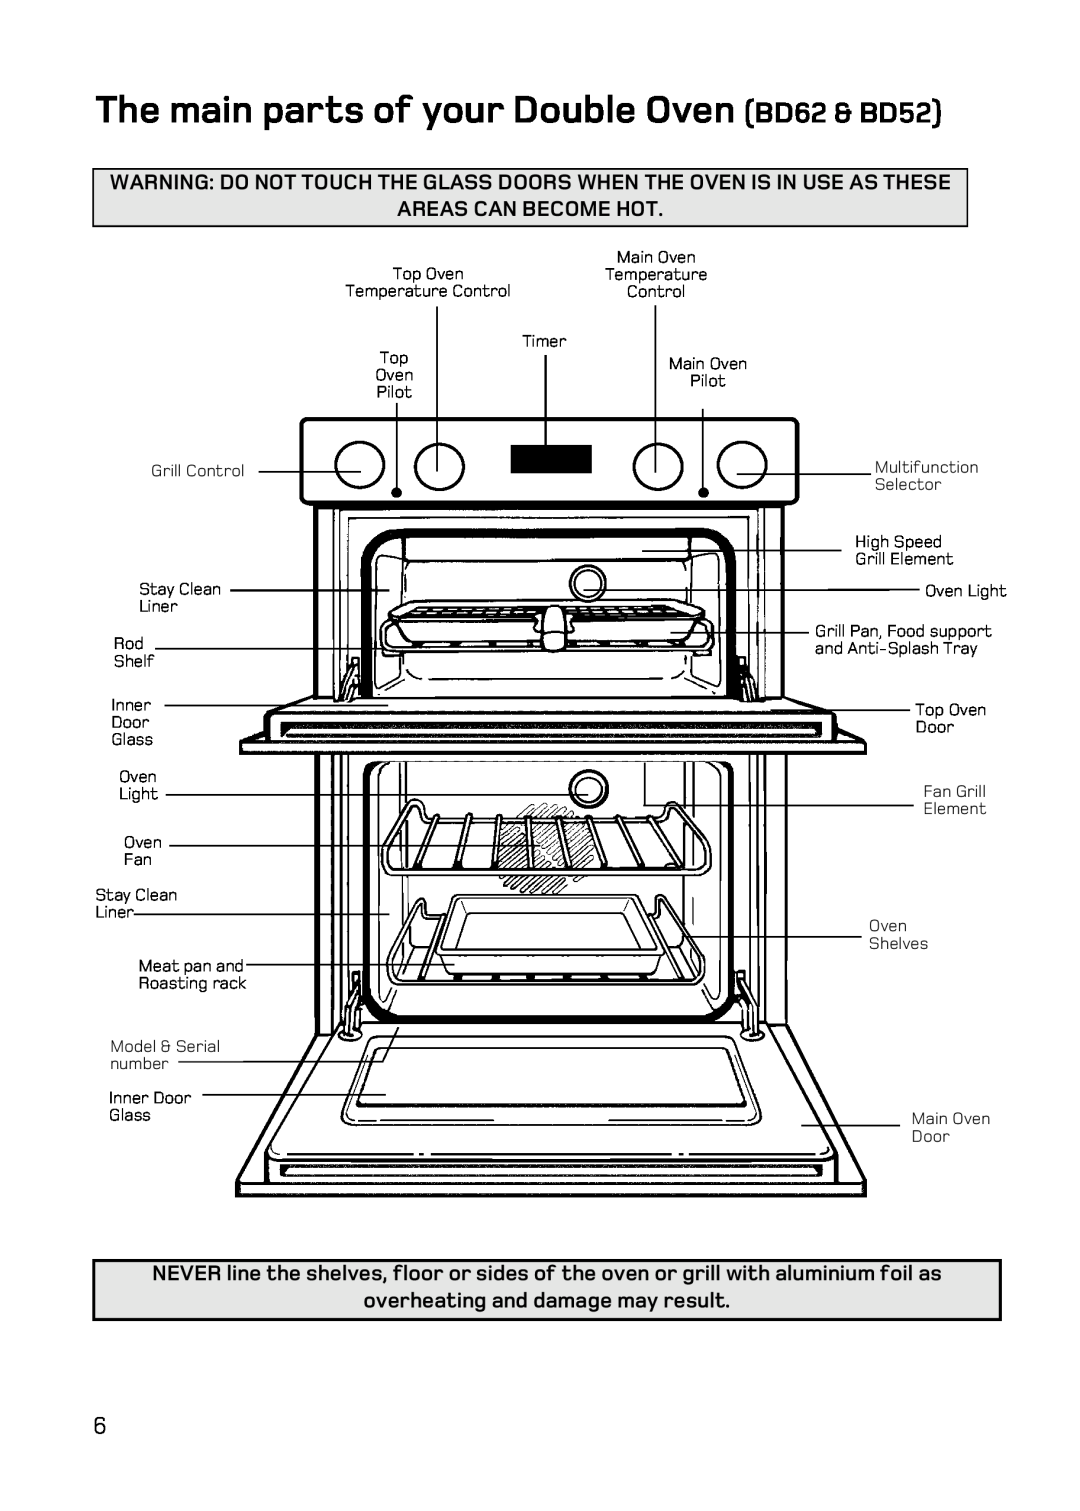 Hotpoint BD52 Mk2, DE47X1, DQ47 Mk2, BD62 Mk2 manual The main parts of your Double Oven BD62 & BD52 